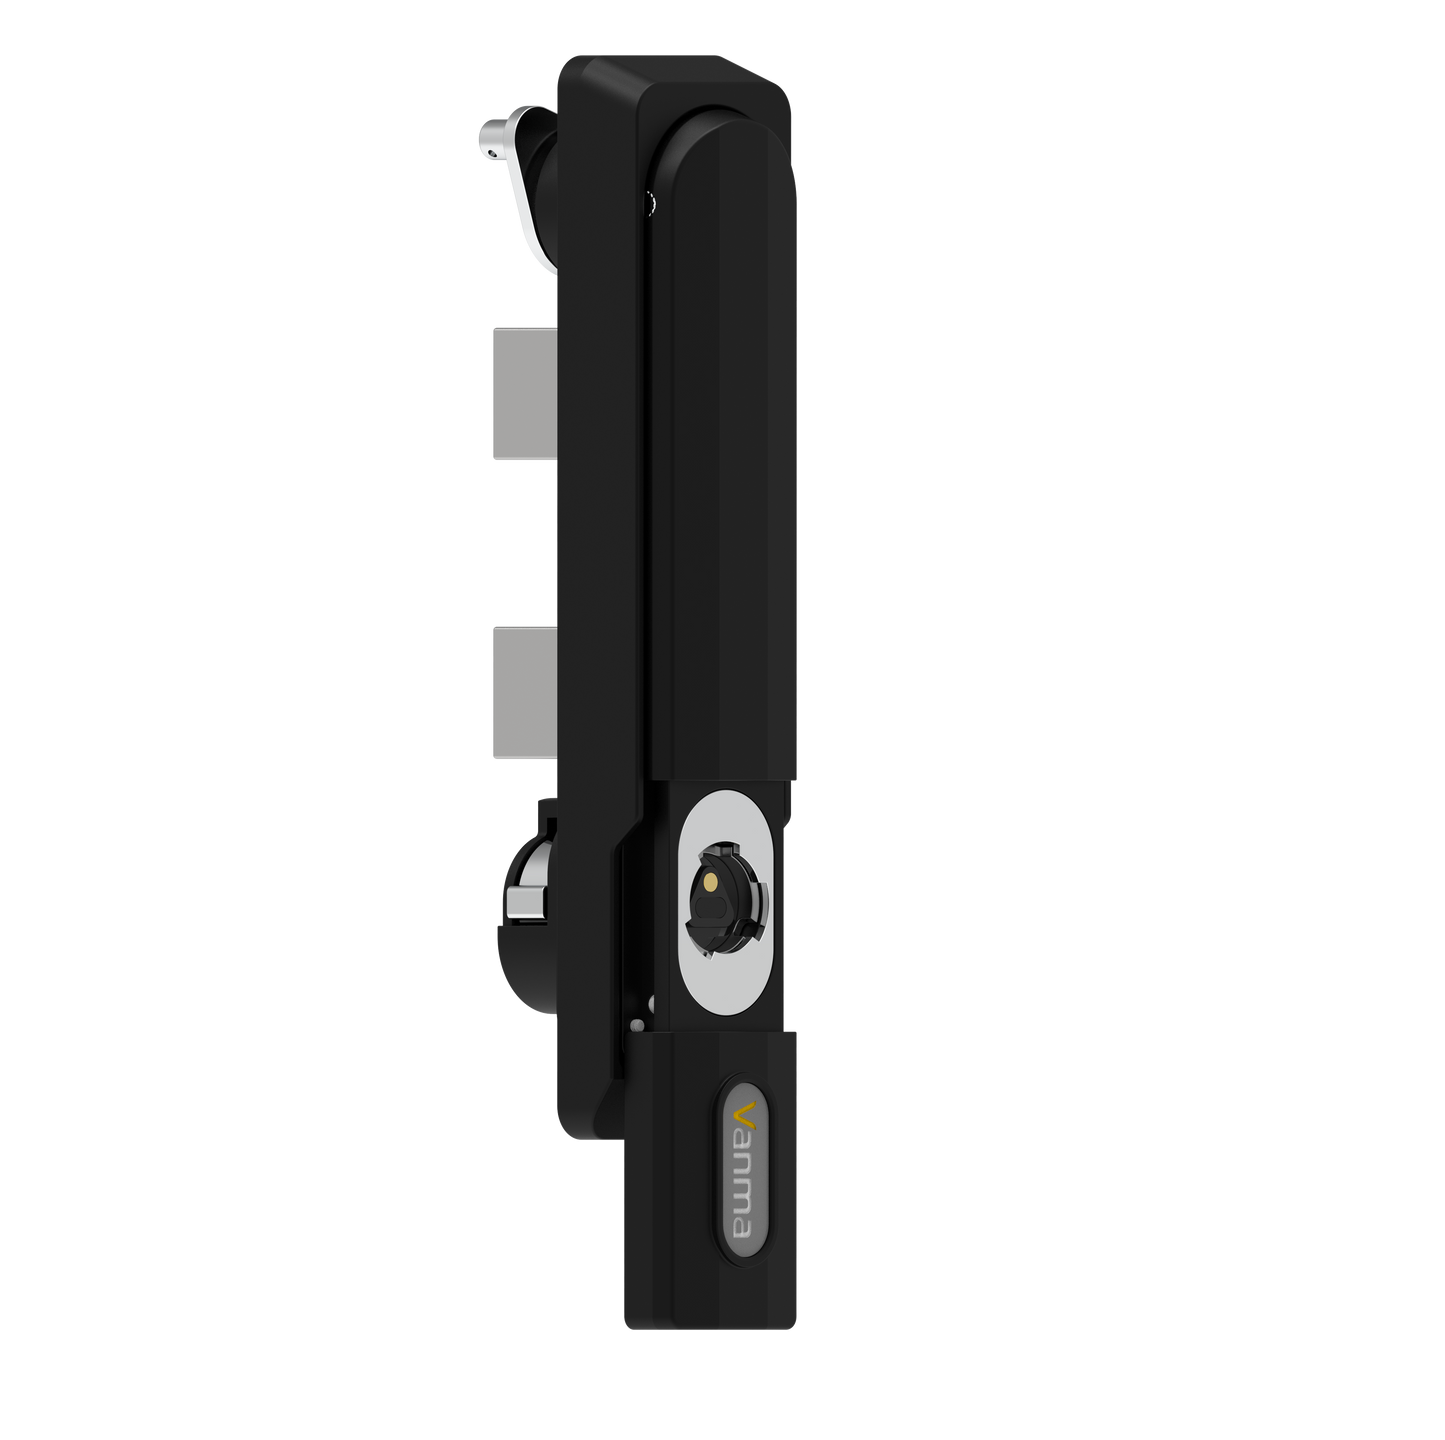 Vanma Passive Electronic Lock, Industrial Security Locking Systems, Intelligent Security Lock